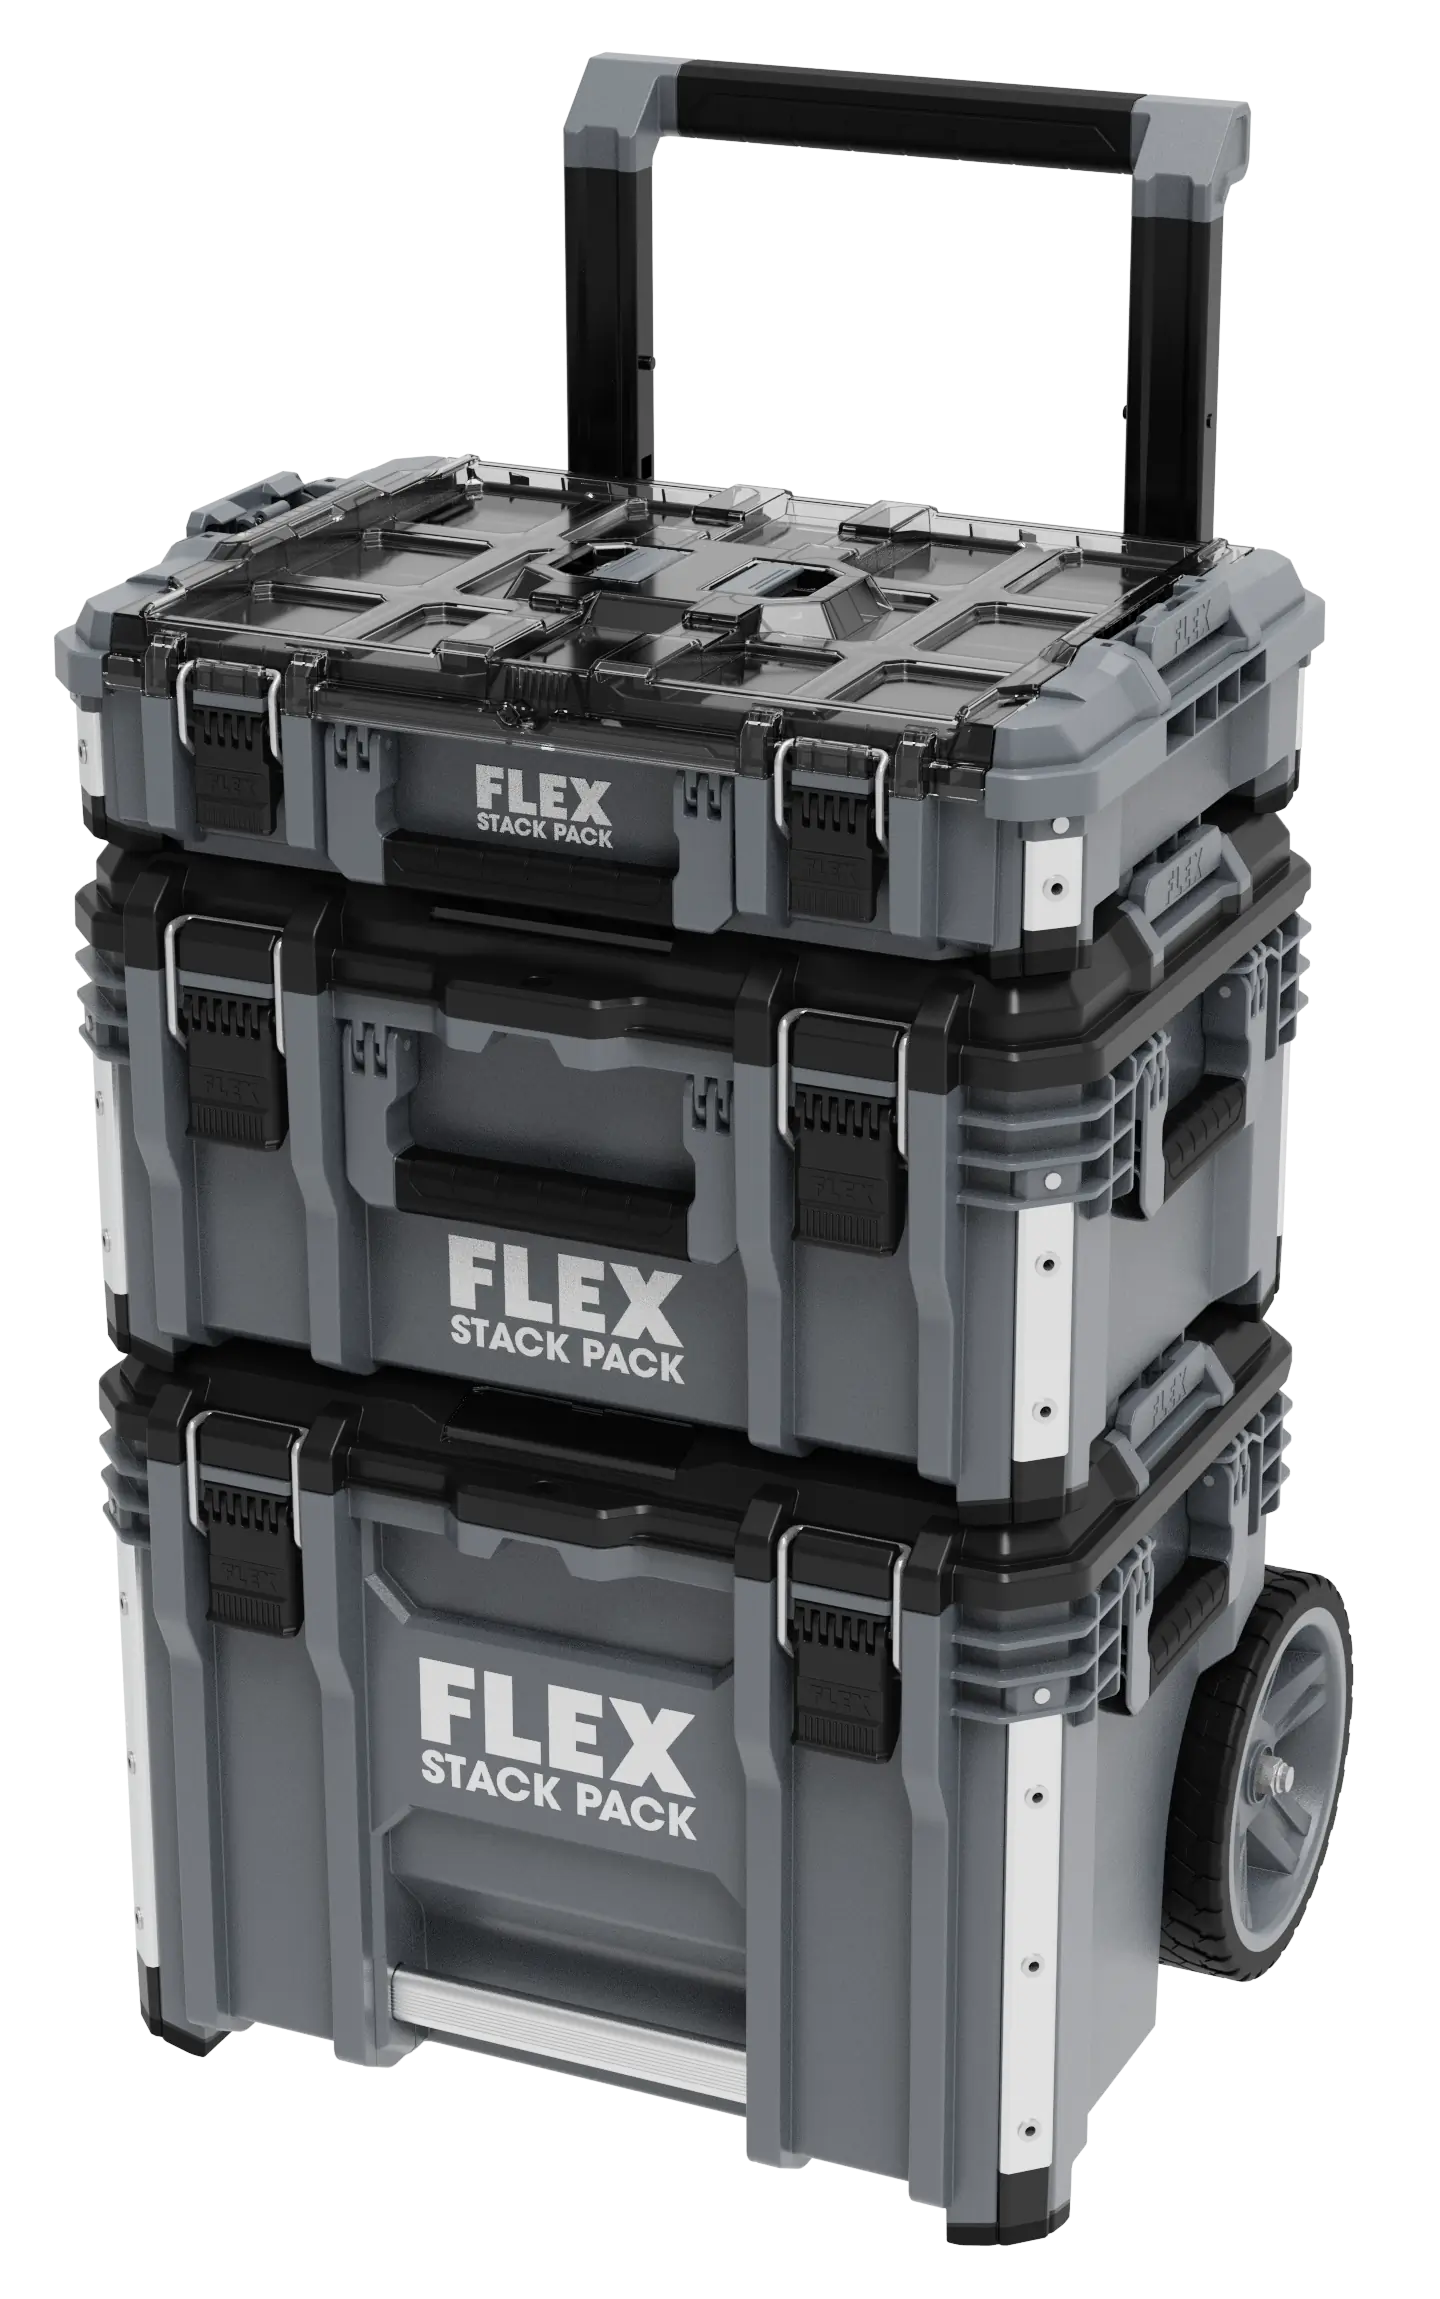 Tool Box FLEX Stack Pack Tool Box Kit for Sale in Los Angeles, CA